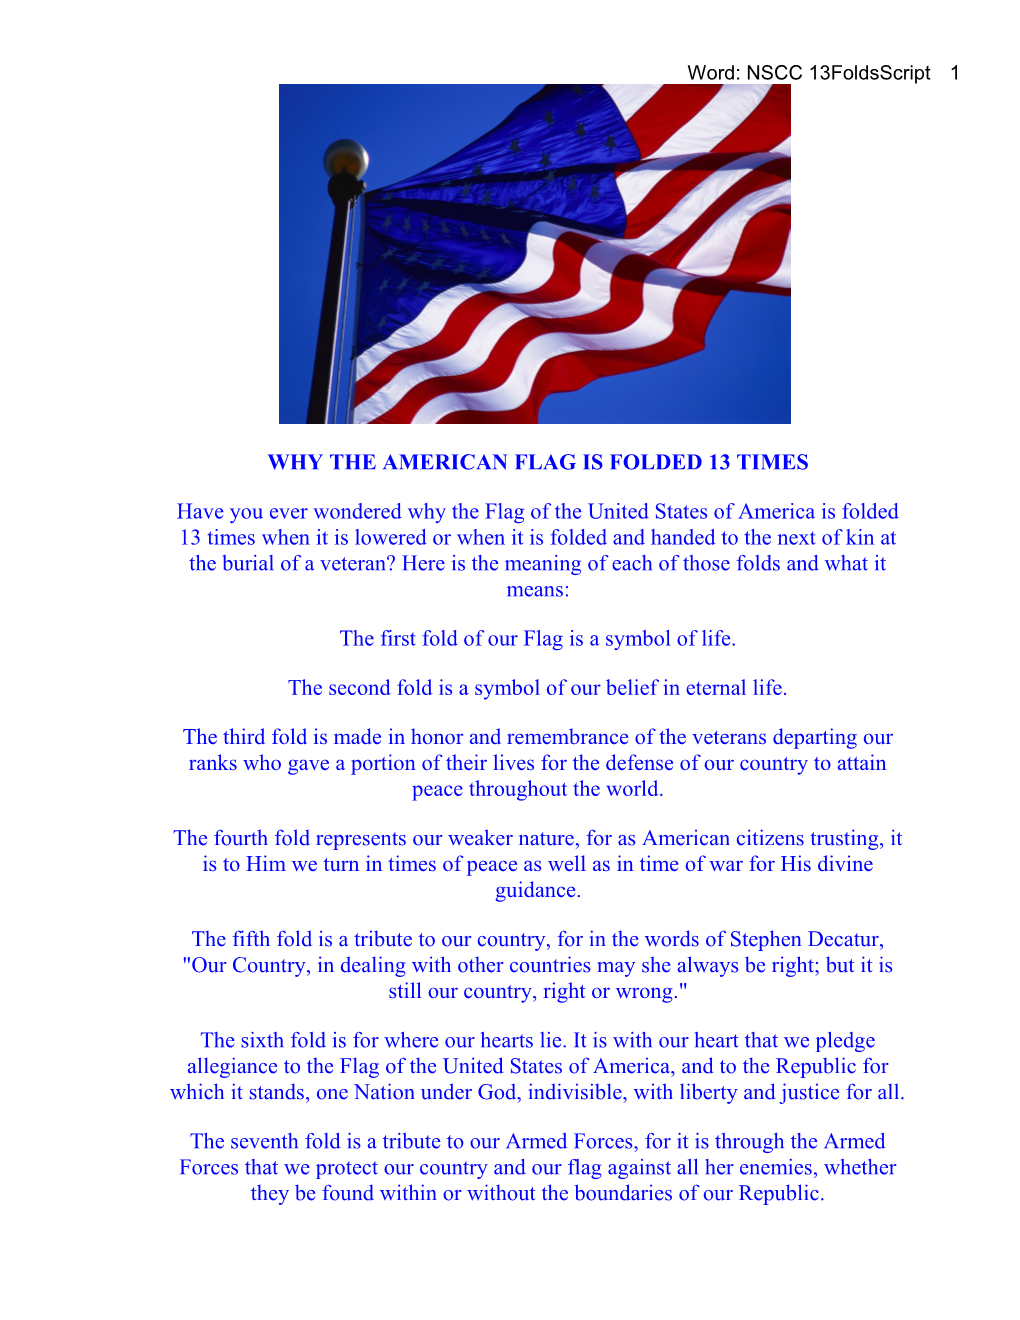 Why the American Flag Is Folded 13 Times